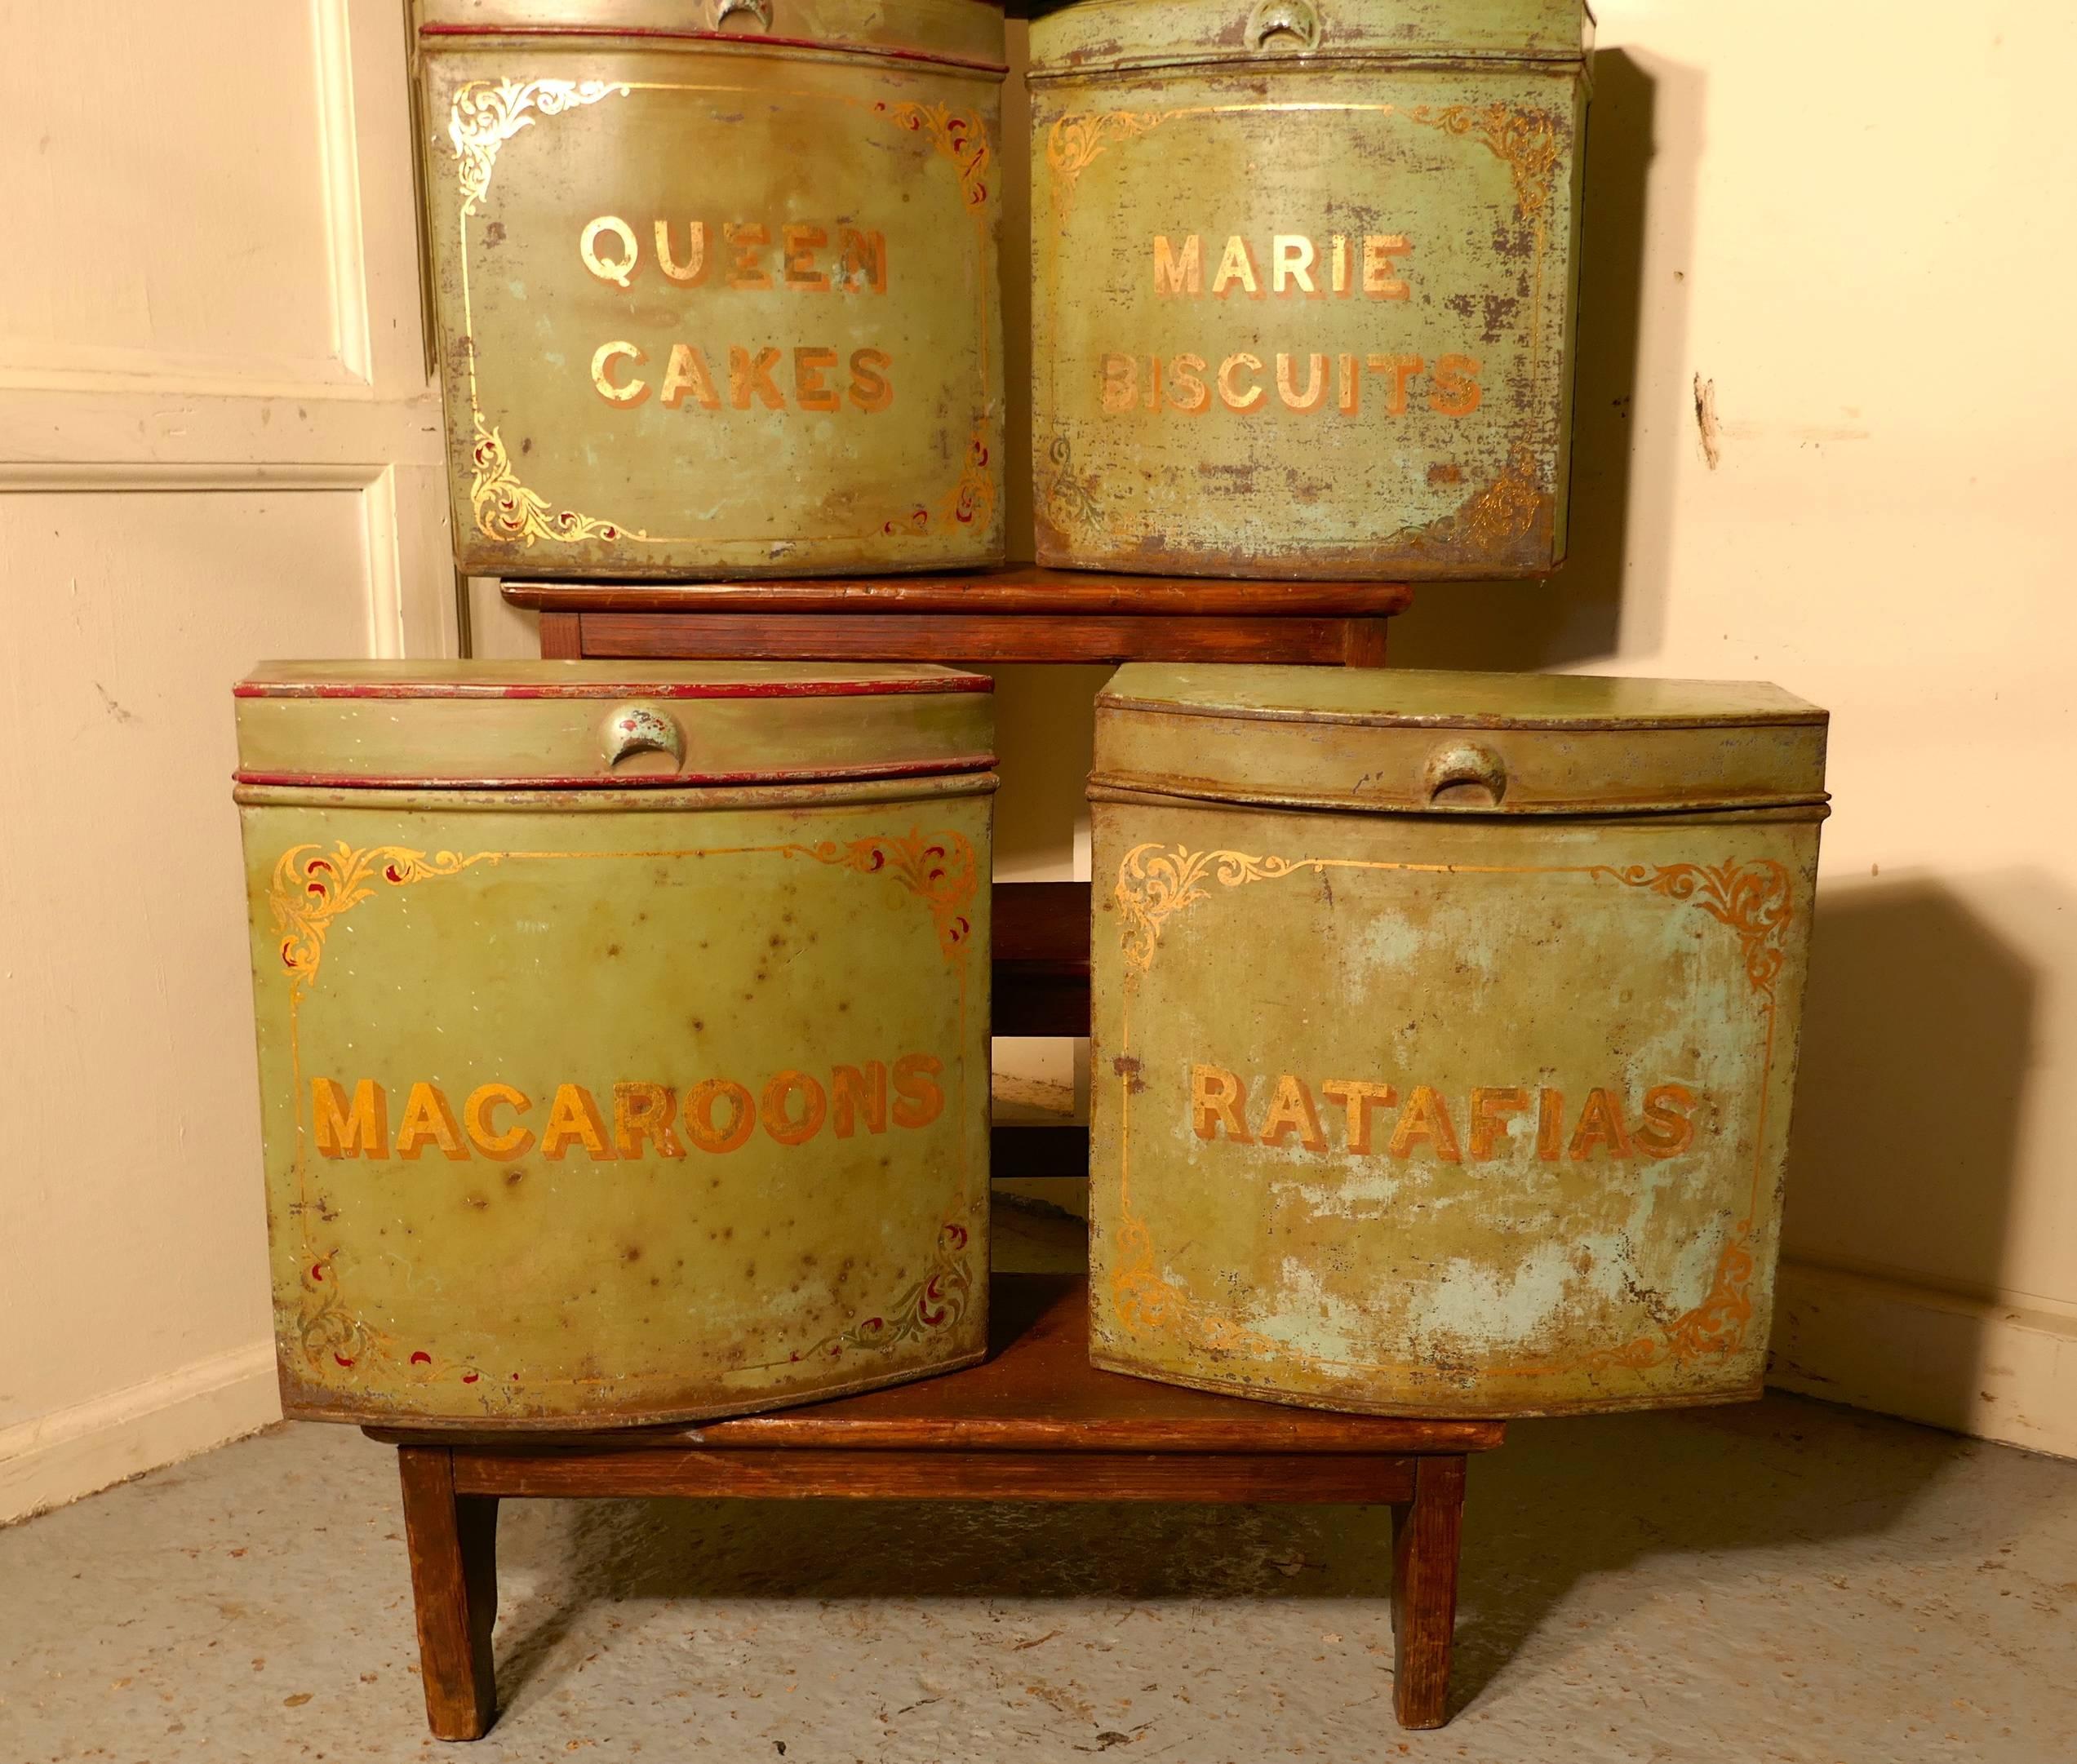 Five Large Victorian Baker’s Shop Tins, Toleware Biscuit Canisters 4